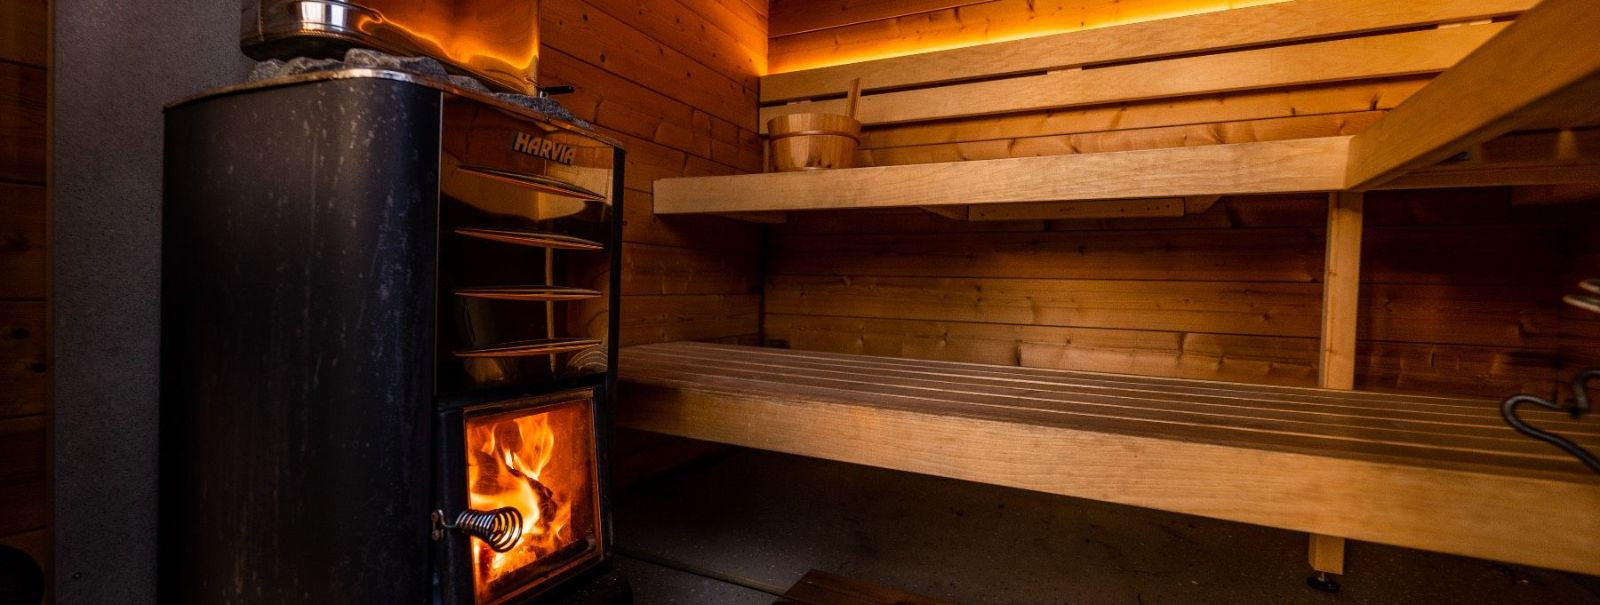 The tradition of the sauna in Estonia is steeped in history, dating back to times when it was the cleanest room in the house and served multiple purposes, from 